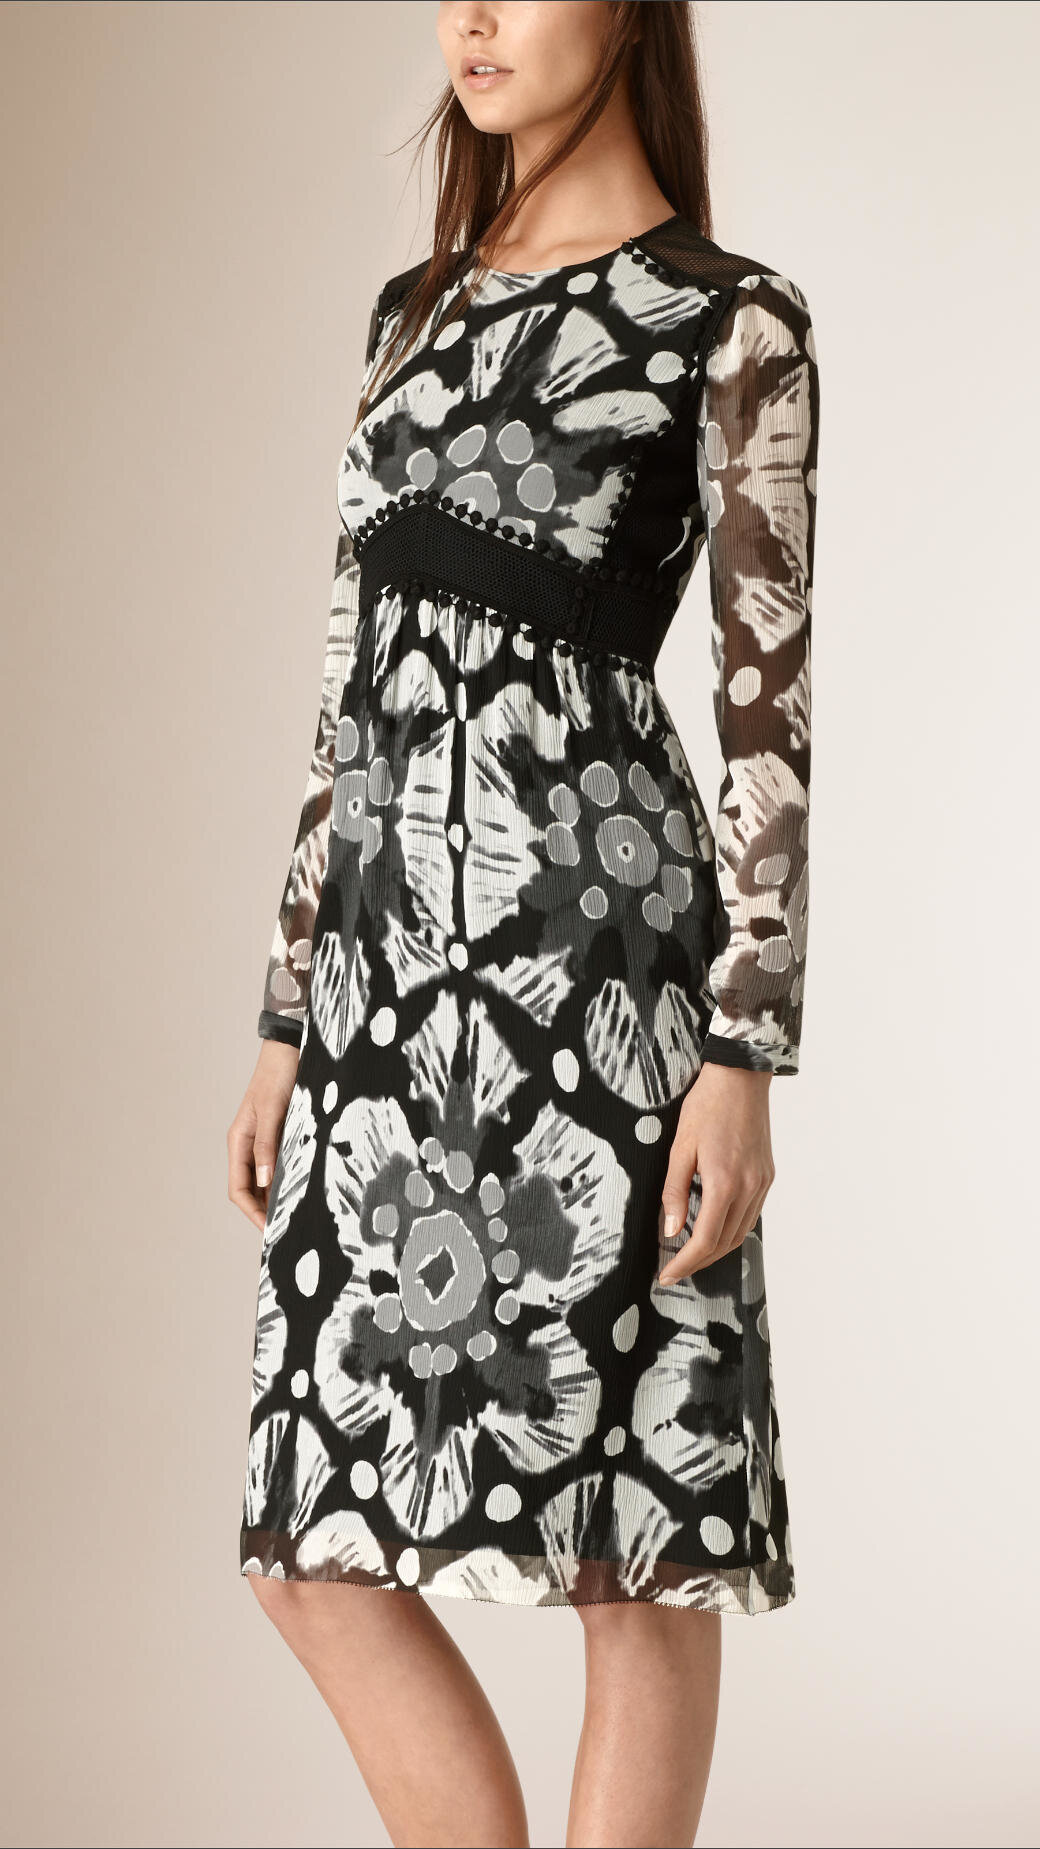 Burberry Tie-Dye Print Crepe De Chine And Lace Dress in Black.jpg